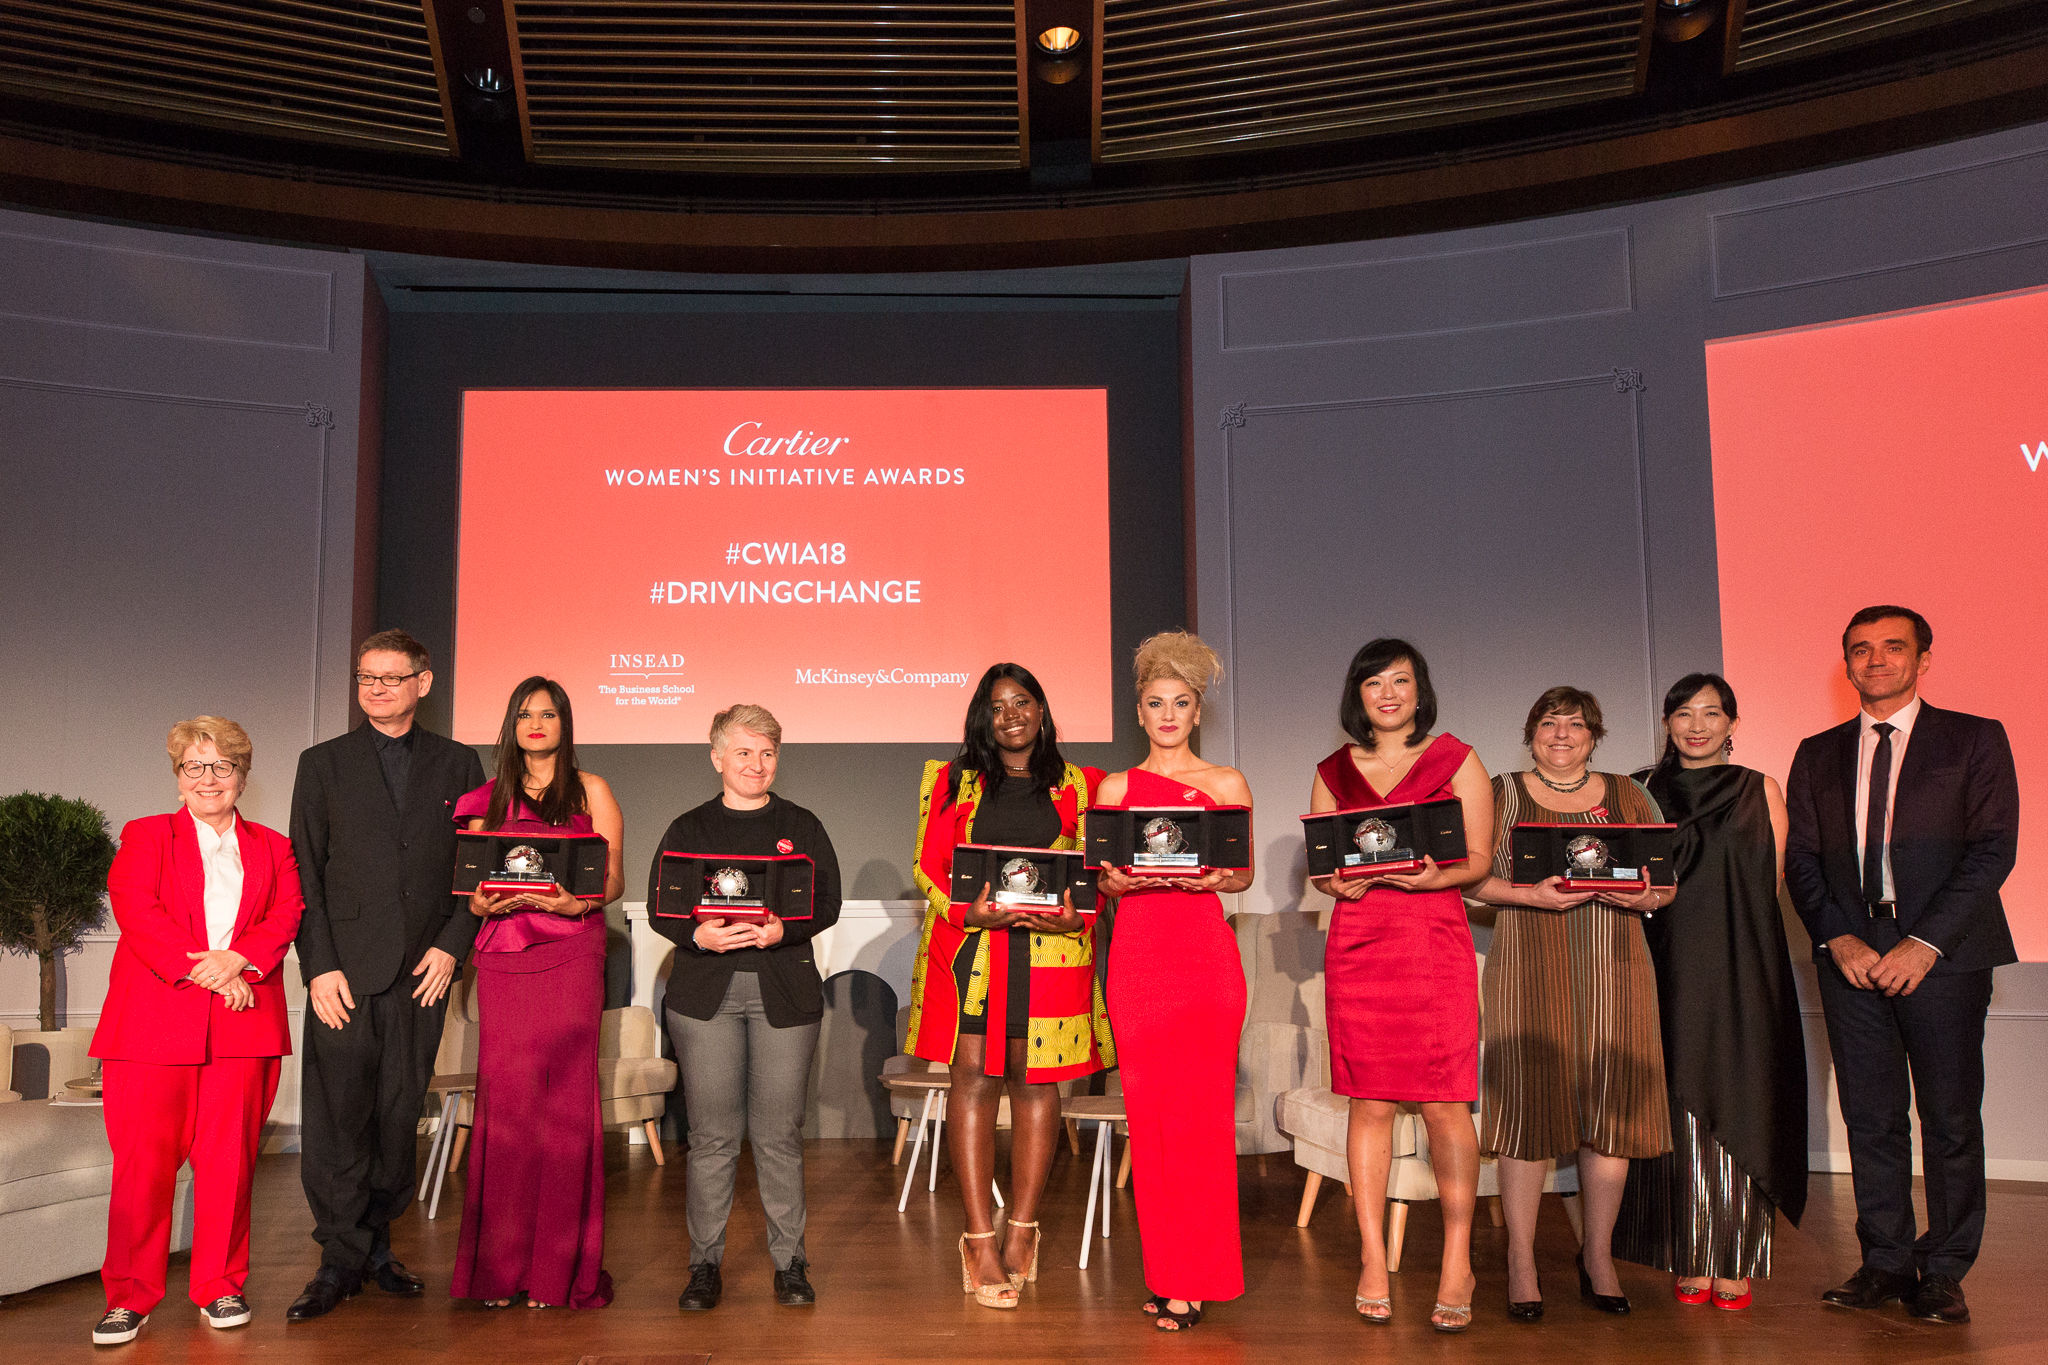 Behold the winners of the 2018 Cartier Women’s Initiative Awards